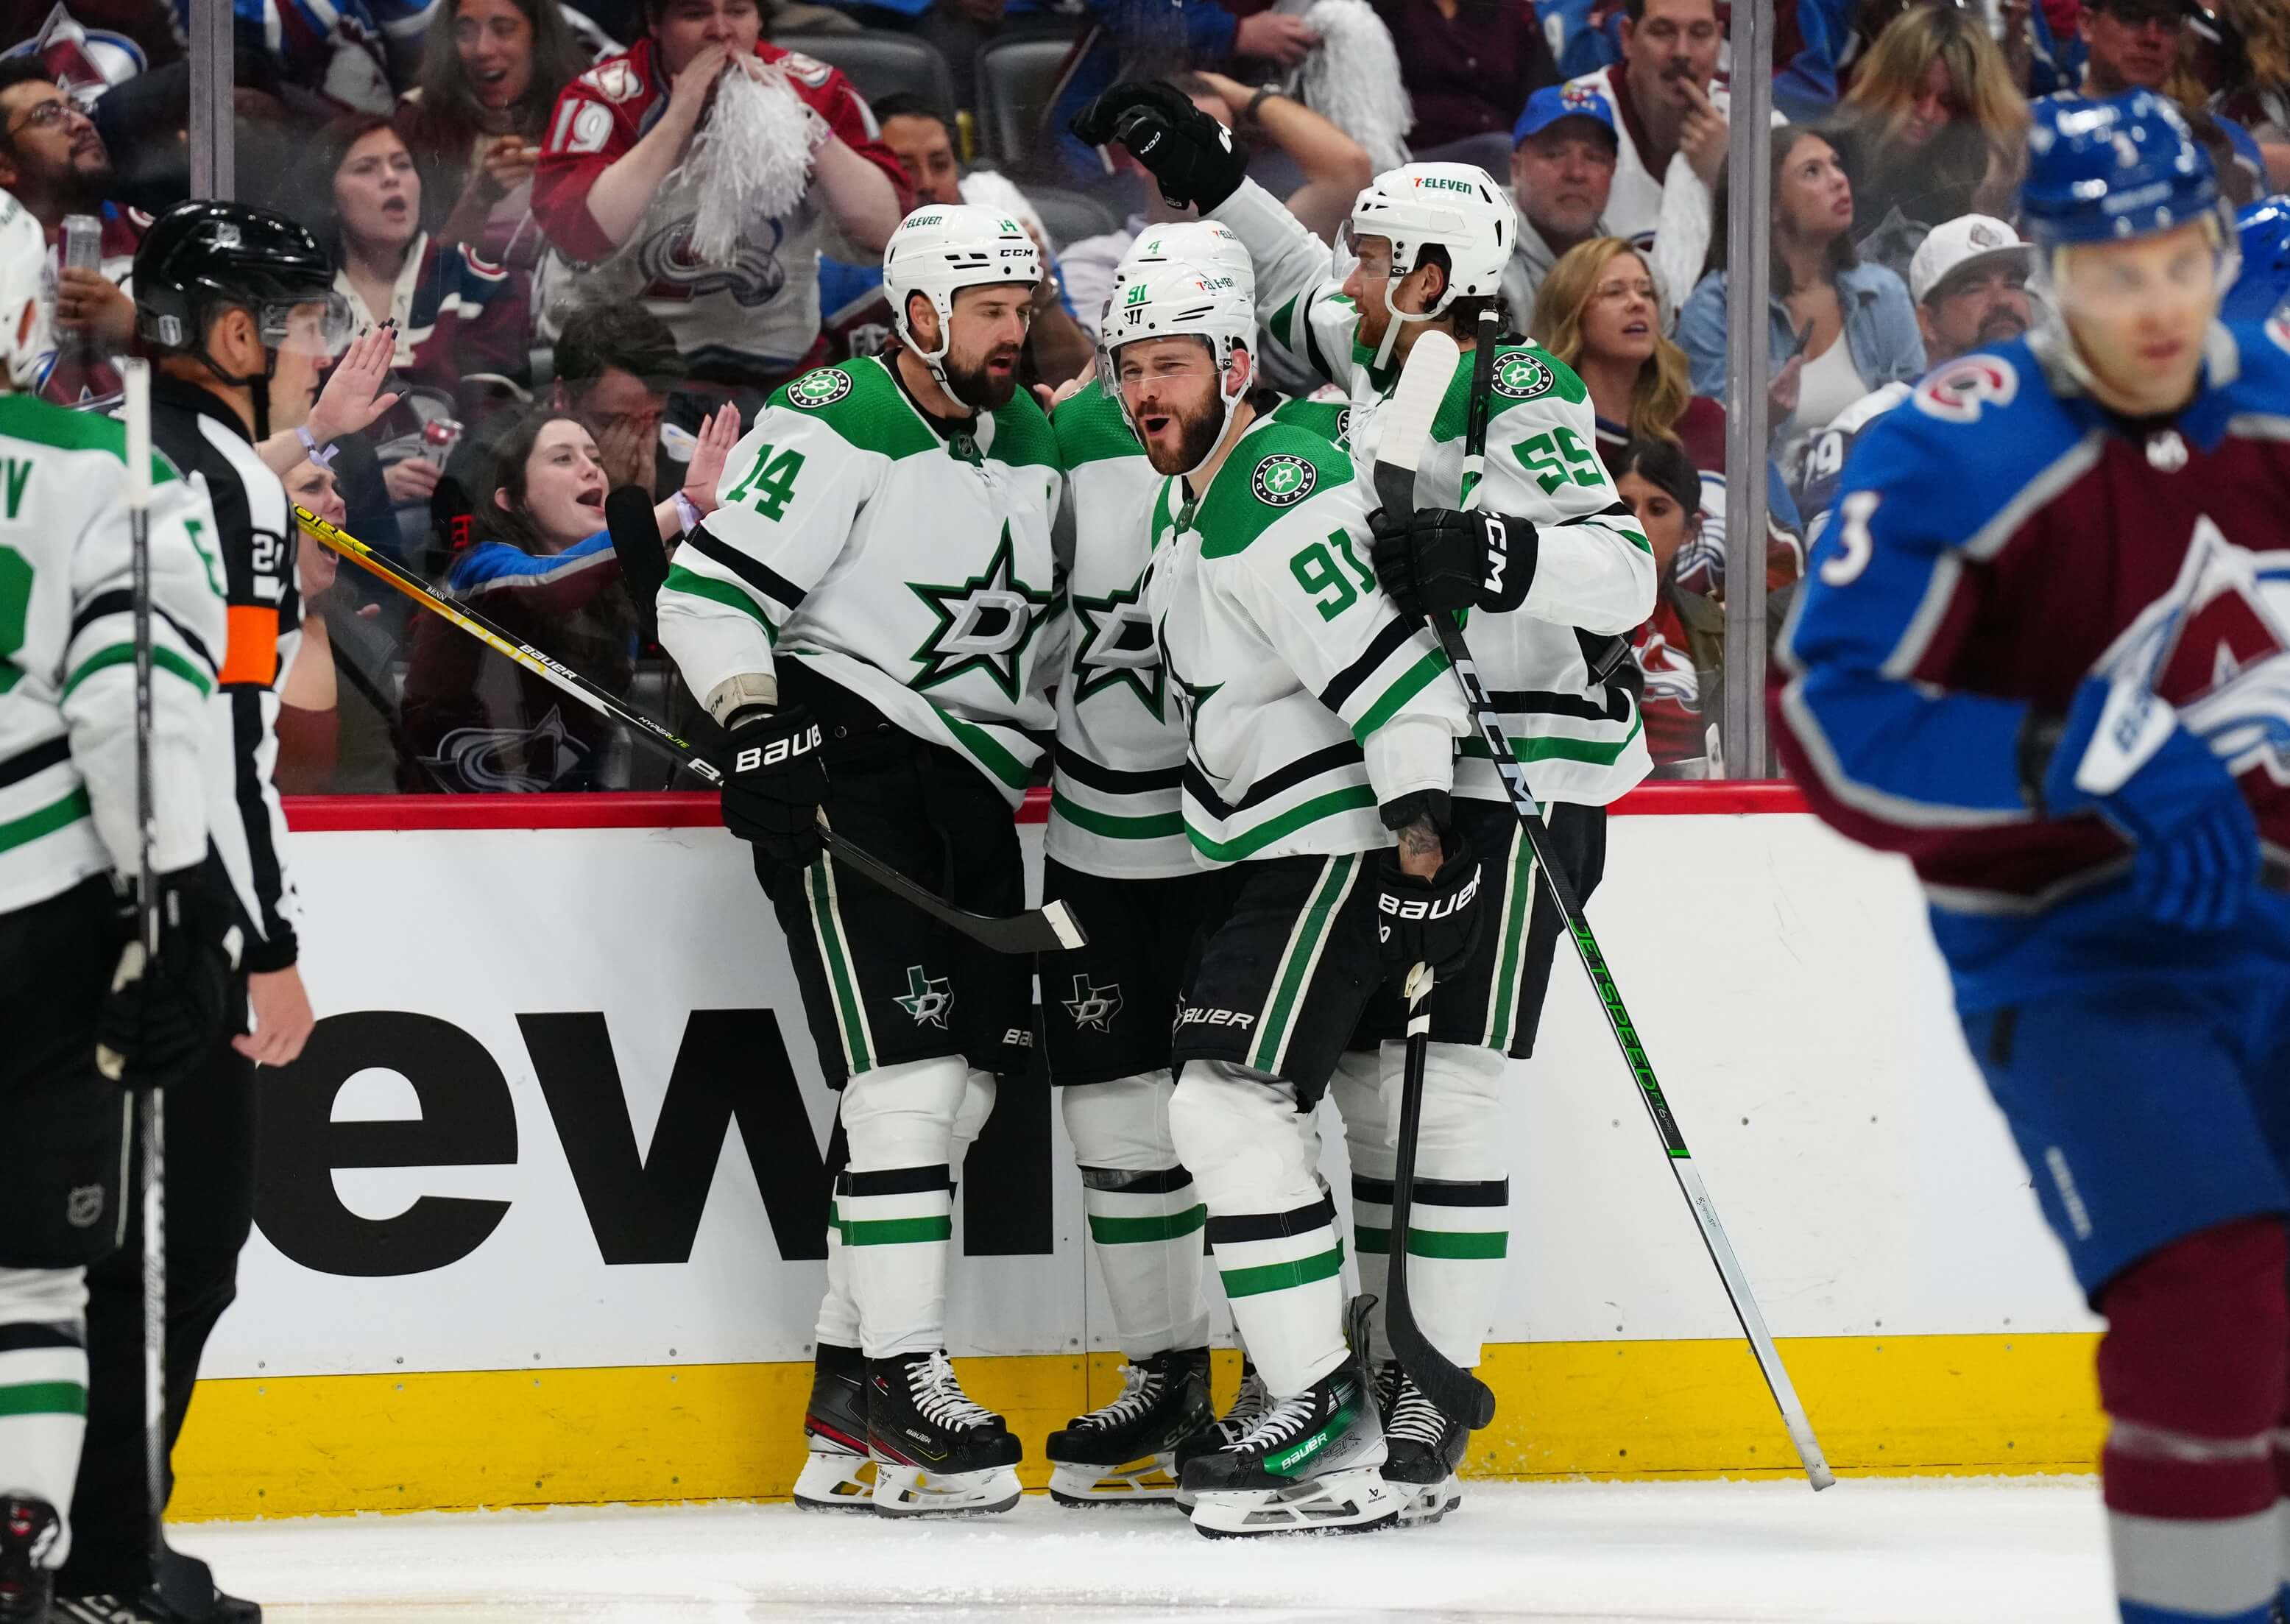 Dallas Stars left wing Jamie Benn (14) celebrates his goal scored with center Tyler Seguin (91) and defenseman Thomas Harley (55) and defenseman Miro Heiskanen (4) in the third period against the Colorado Avalanche in game six.